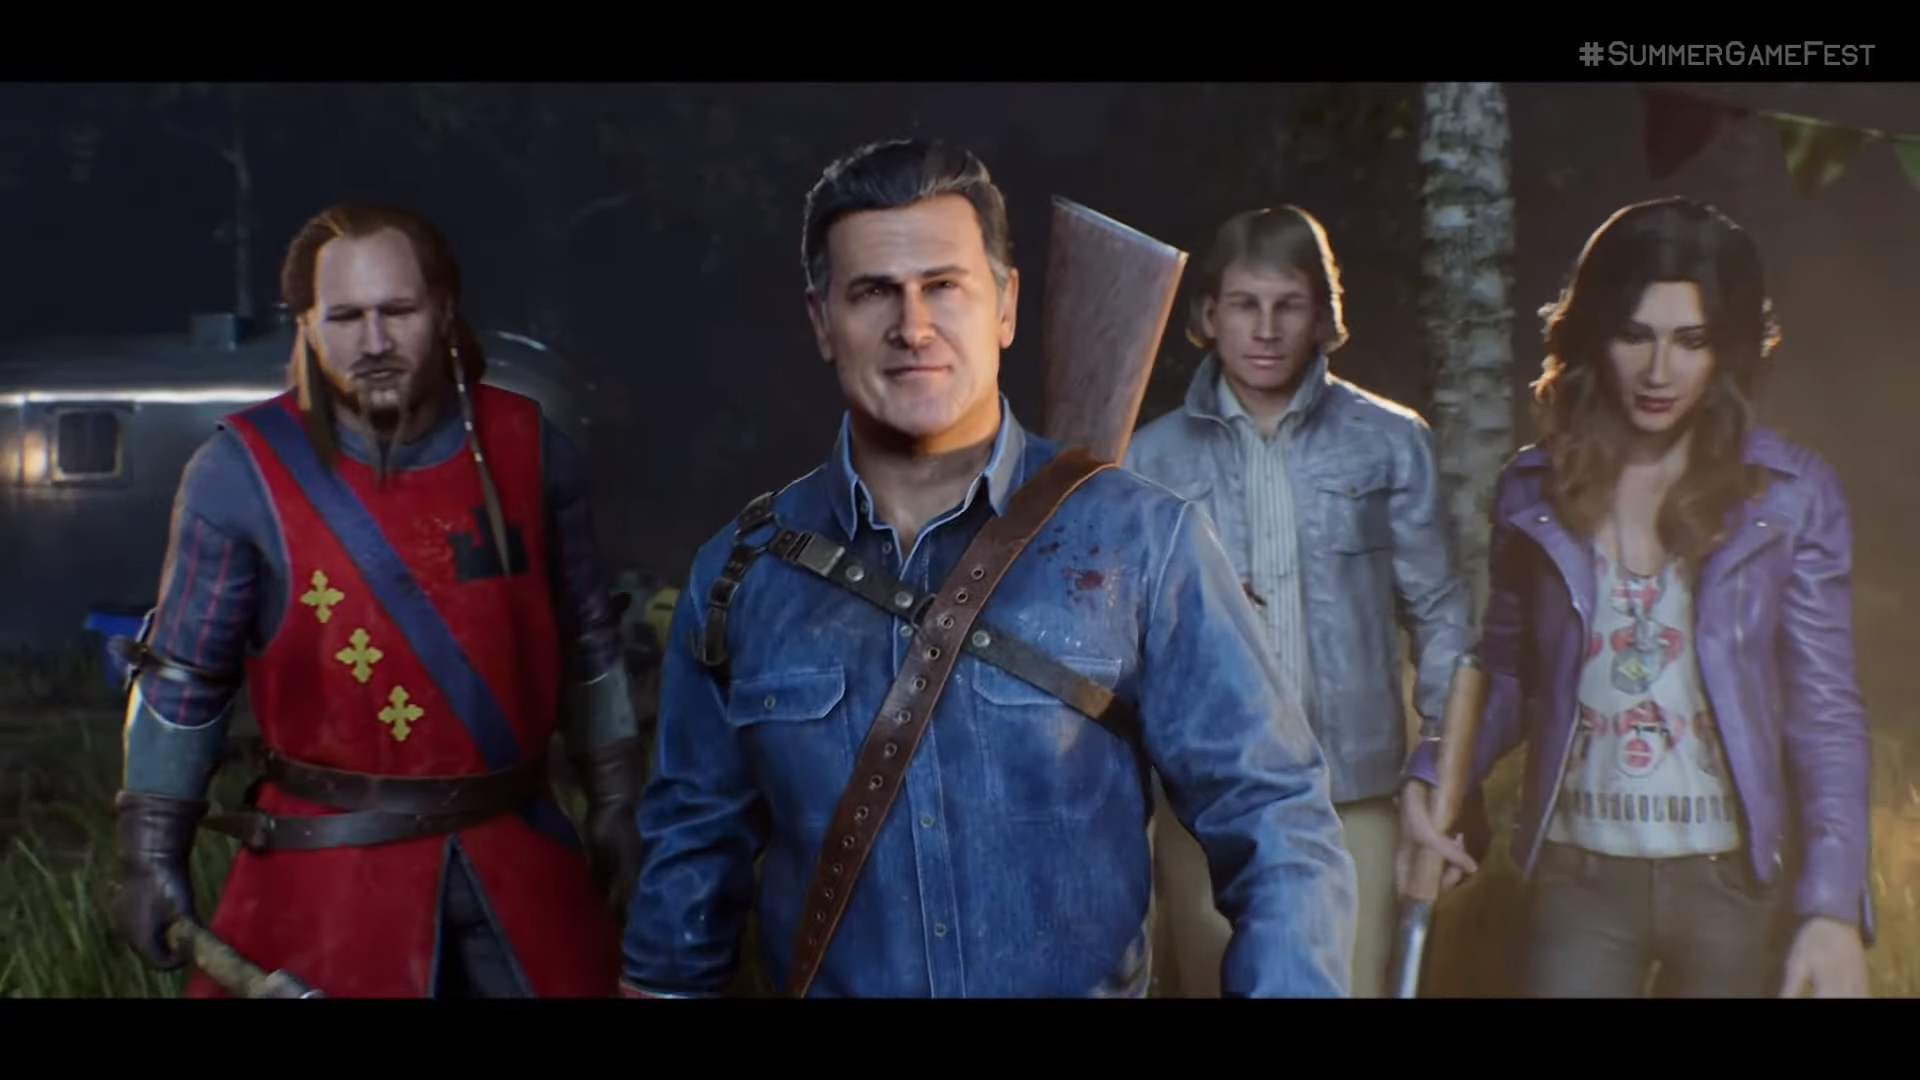 Evil Dead: The Game footage debuts during E3 2021